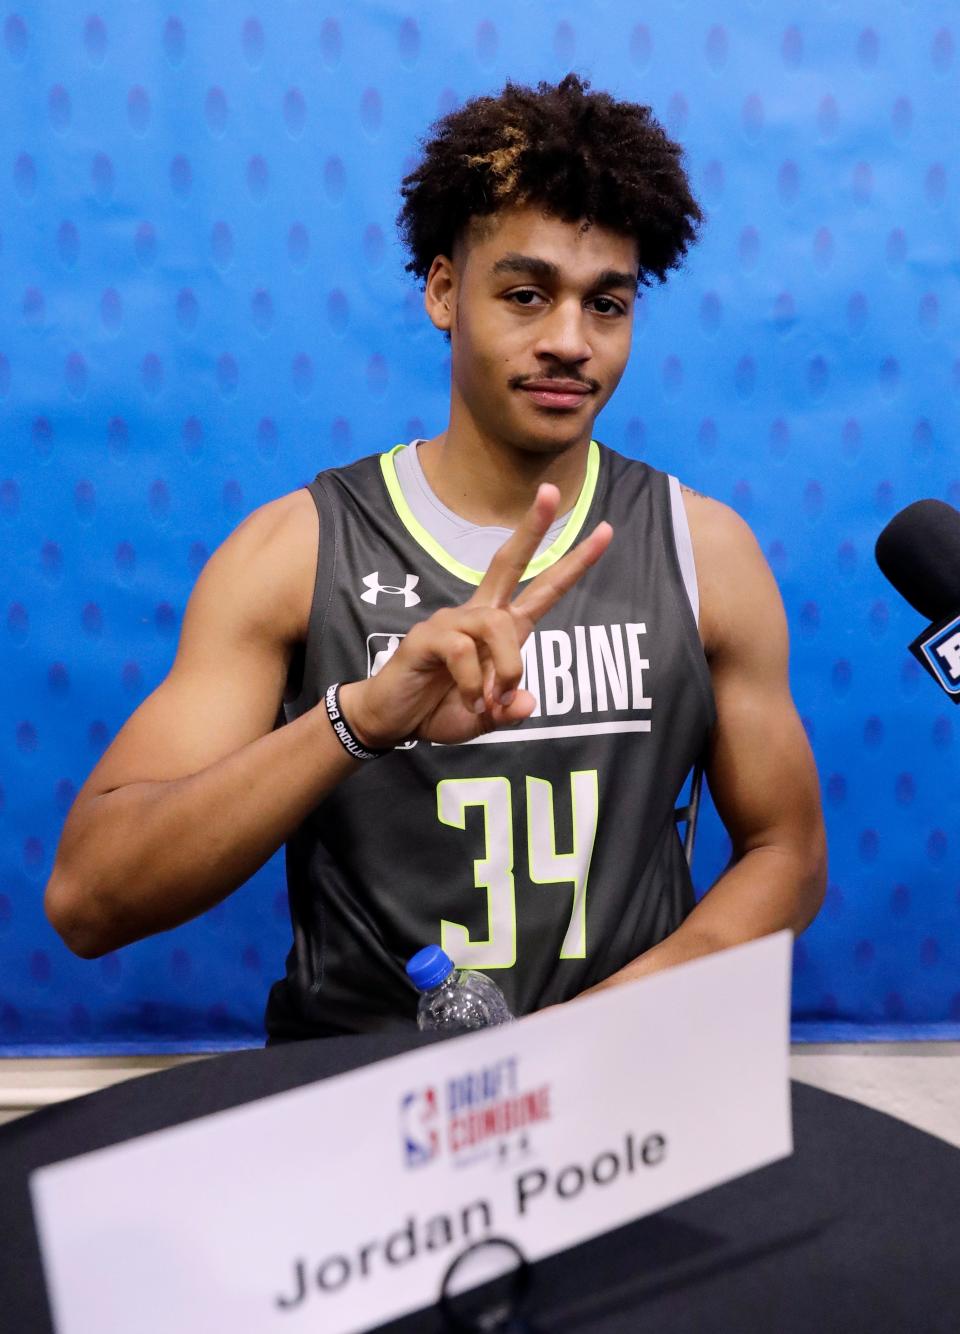 Jordan Poole was a key player on the Golden State Warriors' title-winning team this season.